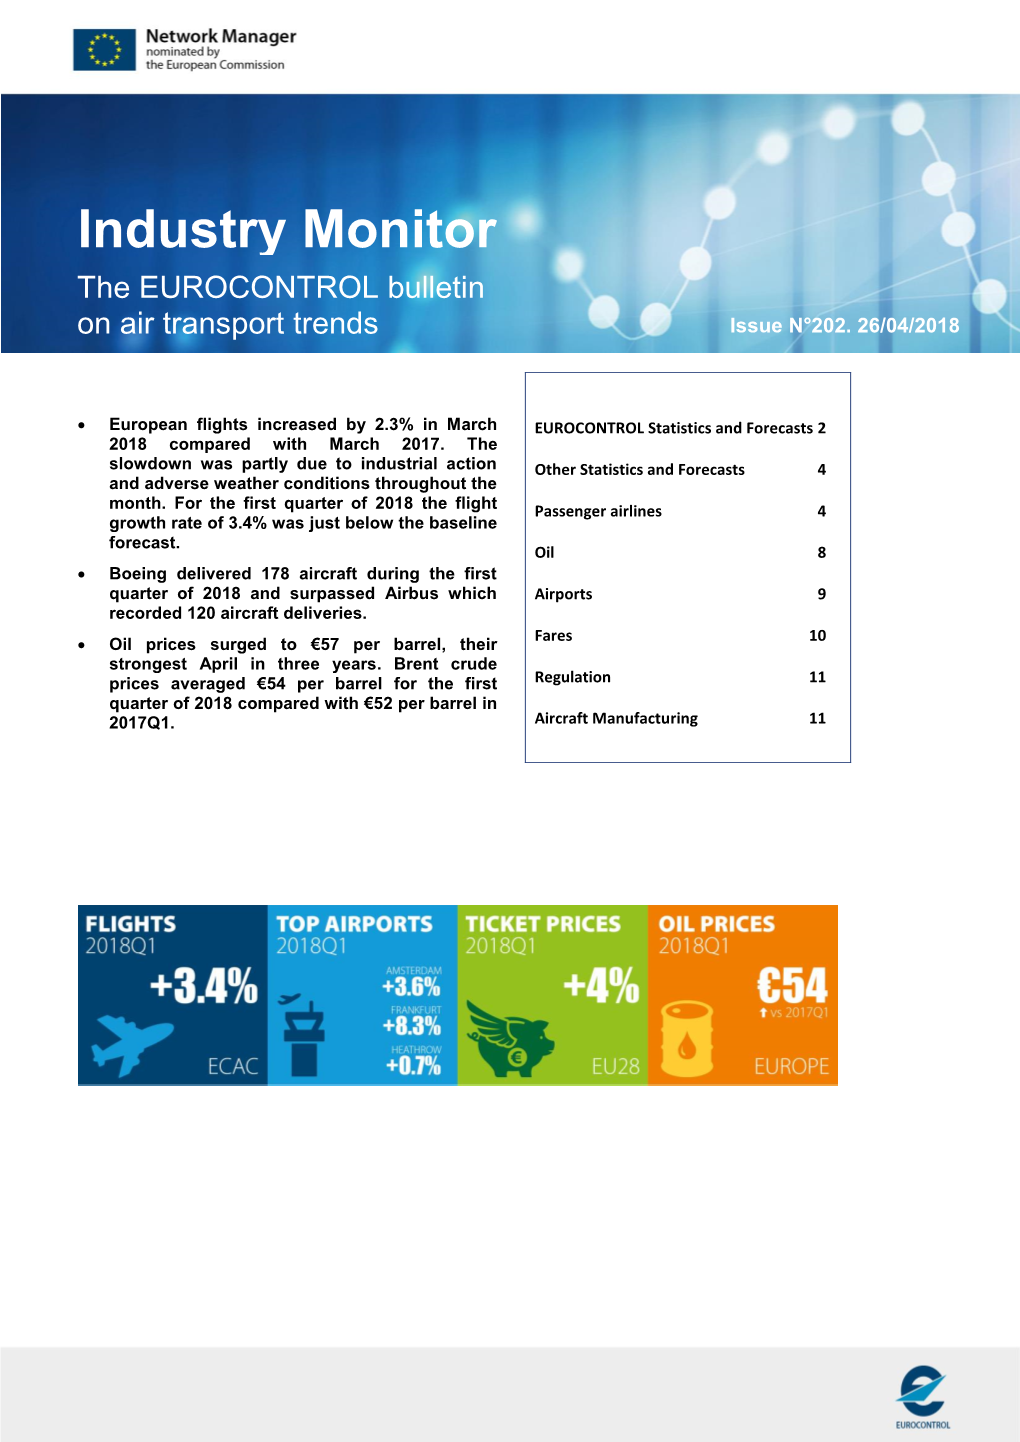 Industry Monitor